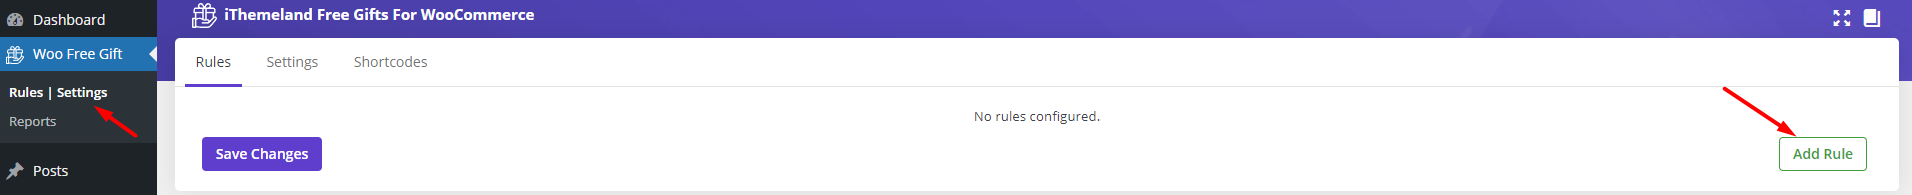 select rules/settings menu and choose add rule button in WooCommerce free gifts plugin